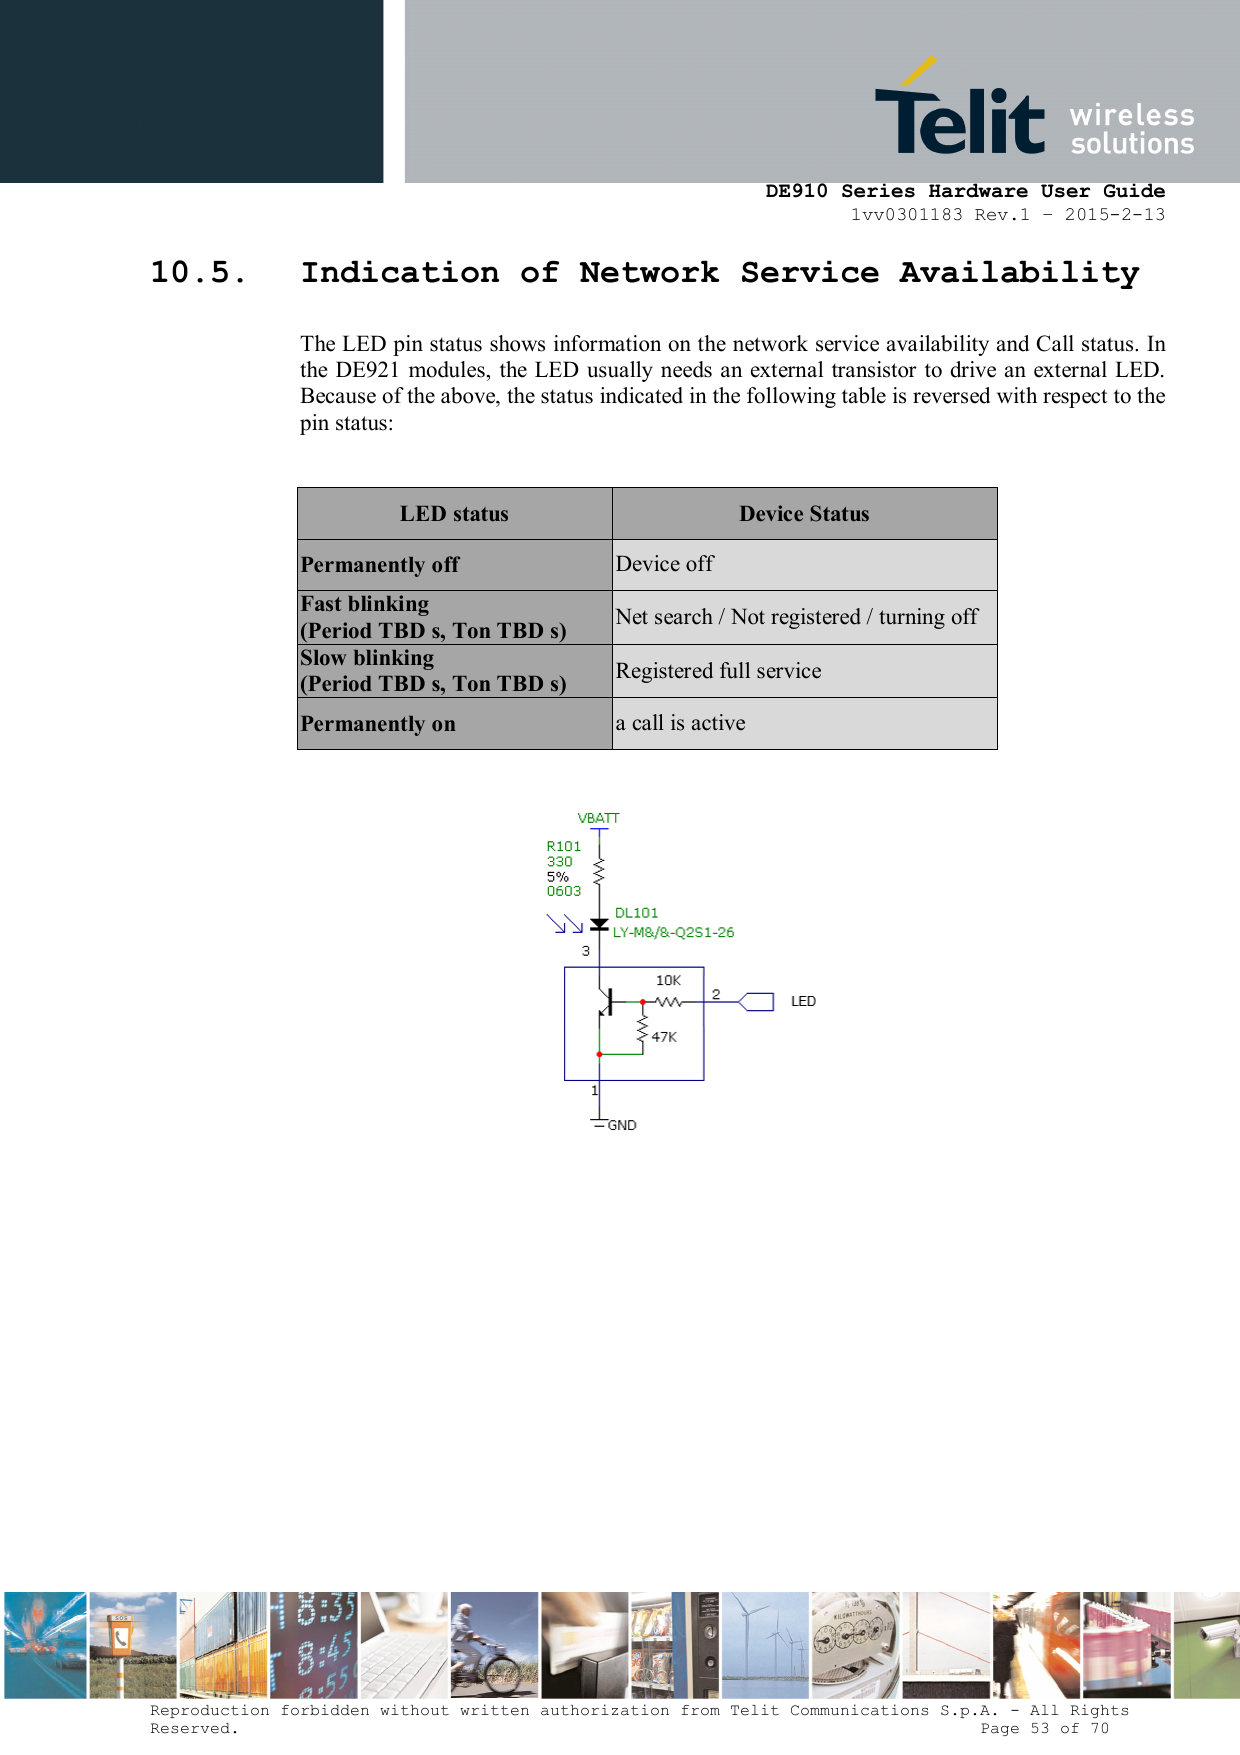      DE910 Series Hardware User Guide 1vv0301183 Rev.1 – 2015-2-13 Reproduction forbidden without written authorization from Telit Communications S.p.A. - All Rights Reserved.                                                                          Page 53 of 70 10.5. Indication of Network Service Availability The LED pin status shows information on the network service availability and Call status. In the  DE921 modules,  the LED usually  needs  an external transistor to  drive an external LED. Because of the above, the status indicated in the following table is reversed with respect to the pin status:  LED status  Device Status Permanently off  Device off Fast blinking (Period TBD s, Ton TBD s)  Net search / Not registered / turning off Slow blinking (Period TBD s, Ton TBD s)  Registered full service Permanently on  a call is active           